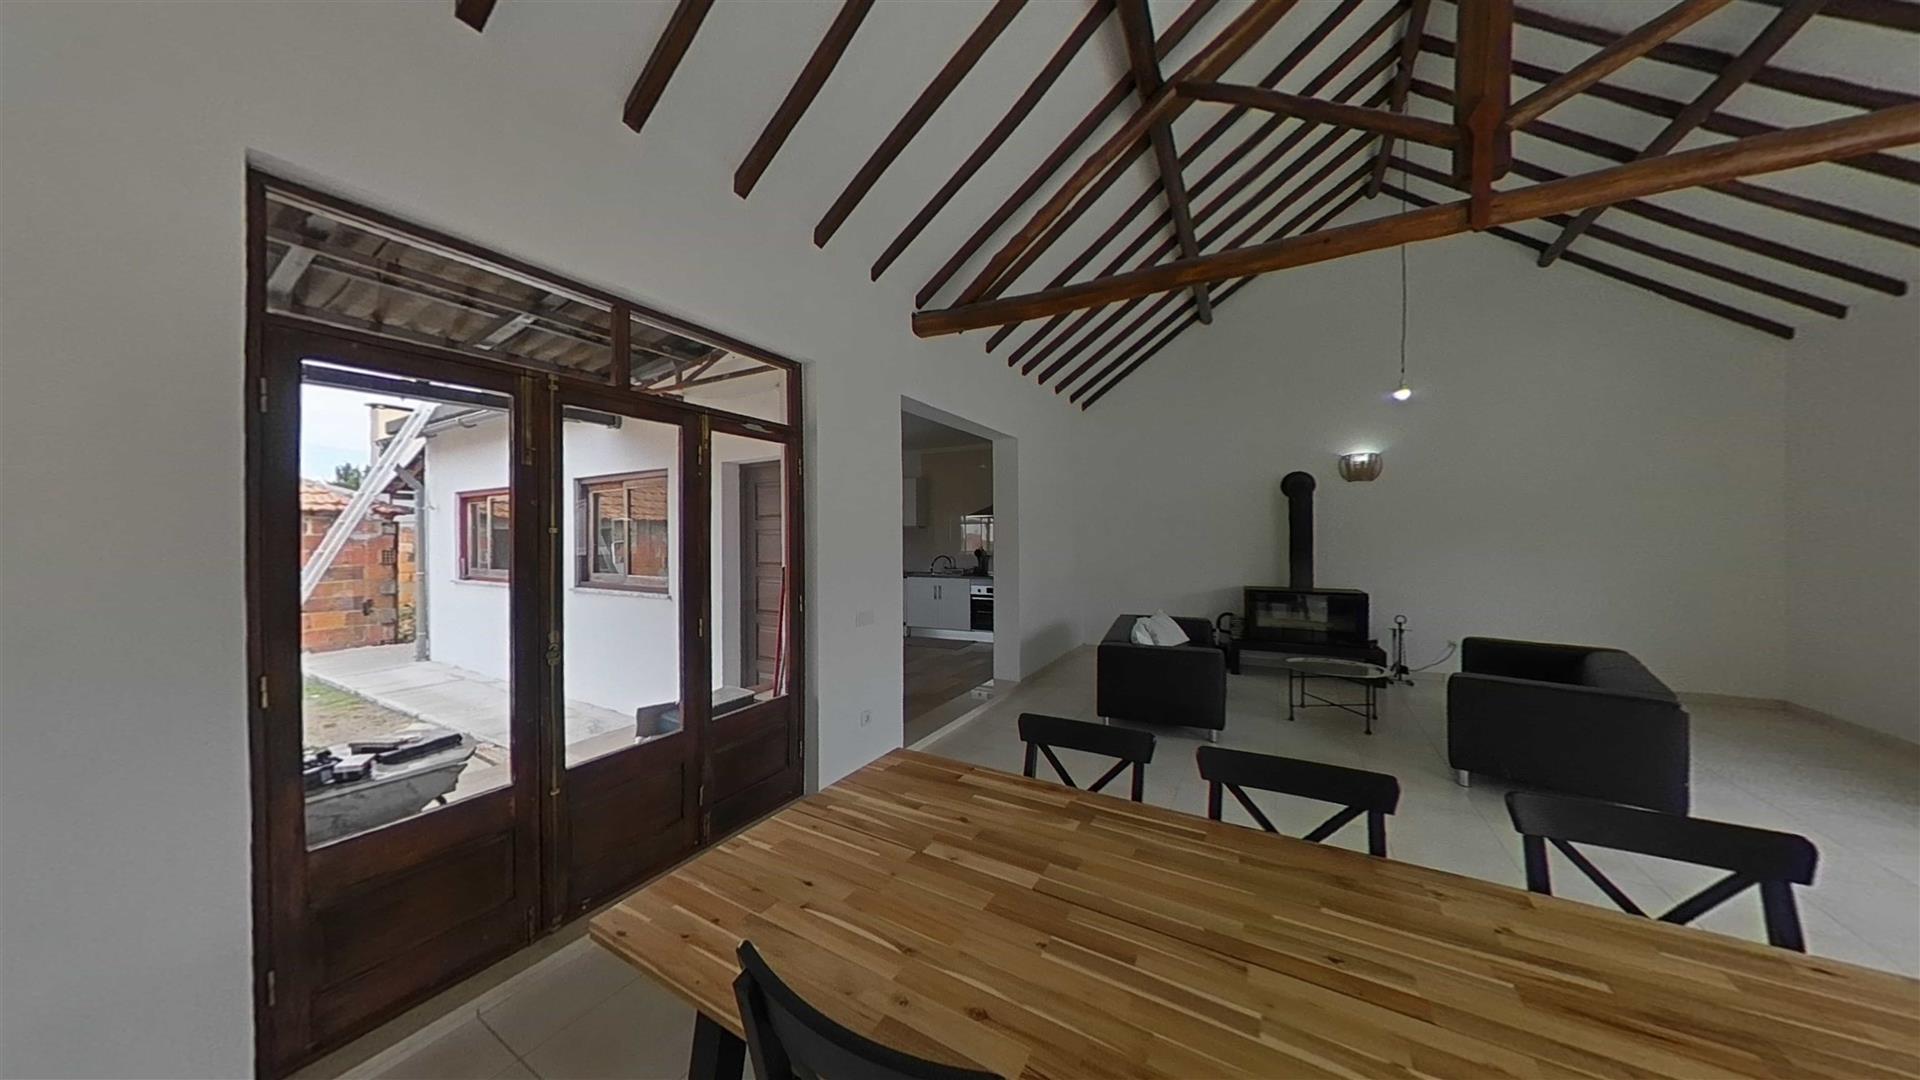 Single storey 2 bedroom villa with two suites, large living room and large spaces.